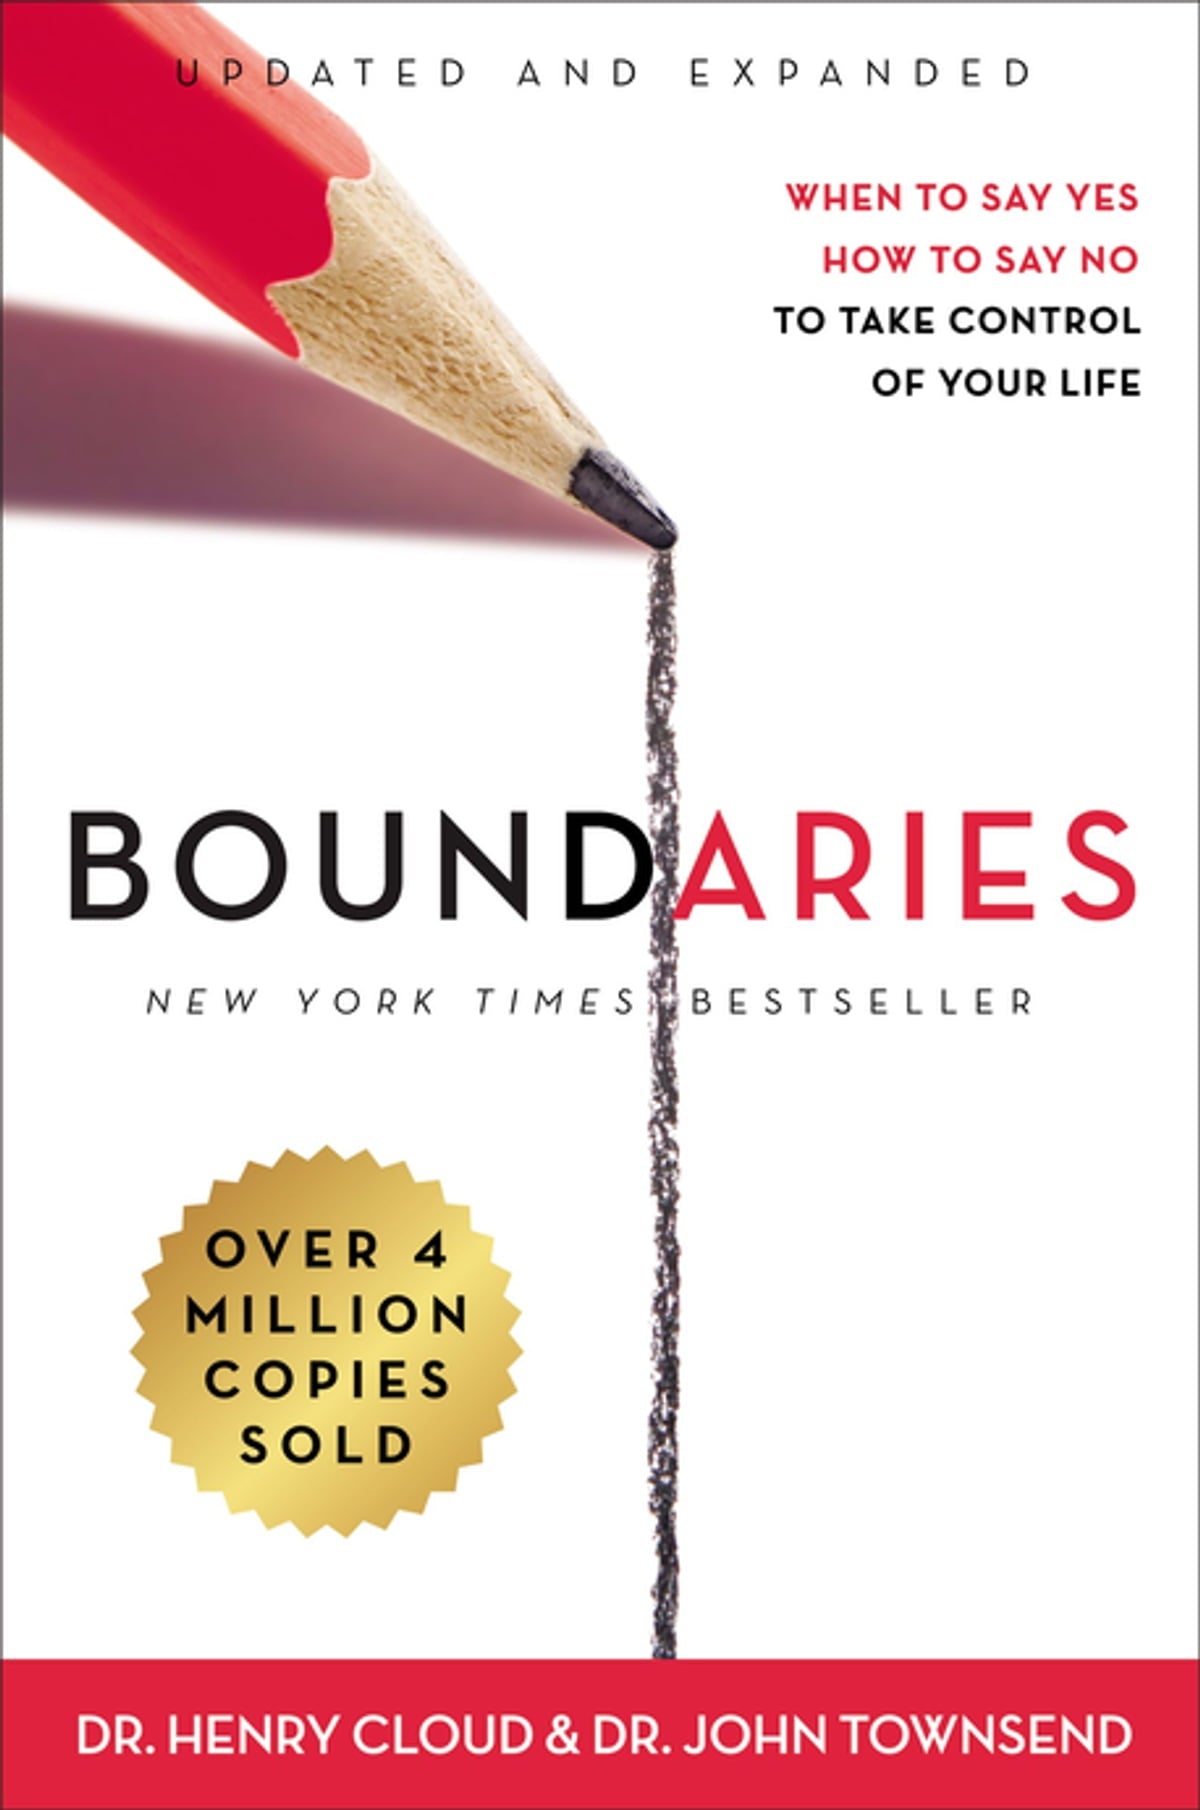 Boundaries: When to Say Yes, How to Say No to Take Control of Your Life by Henry Cloud